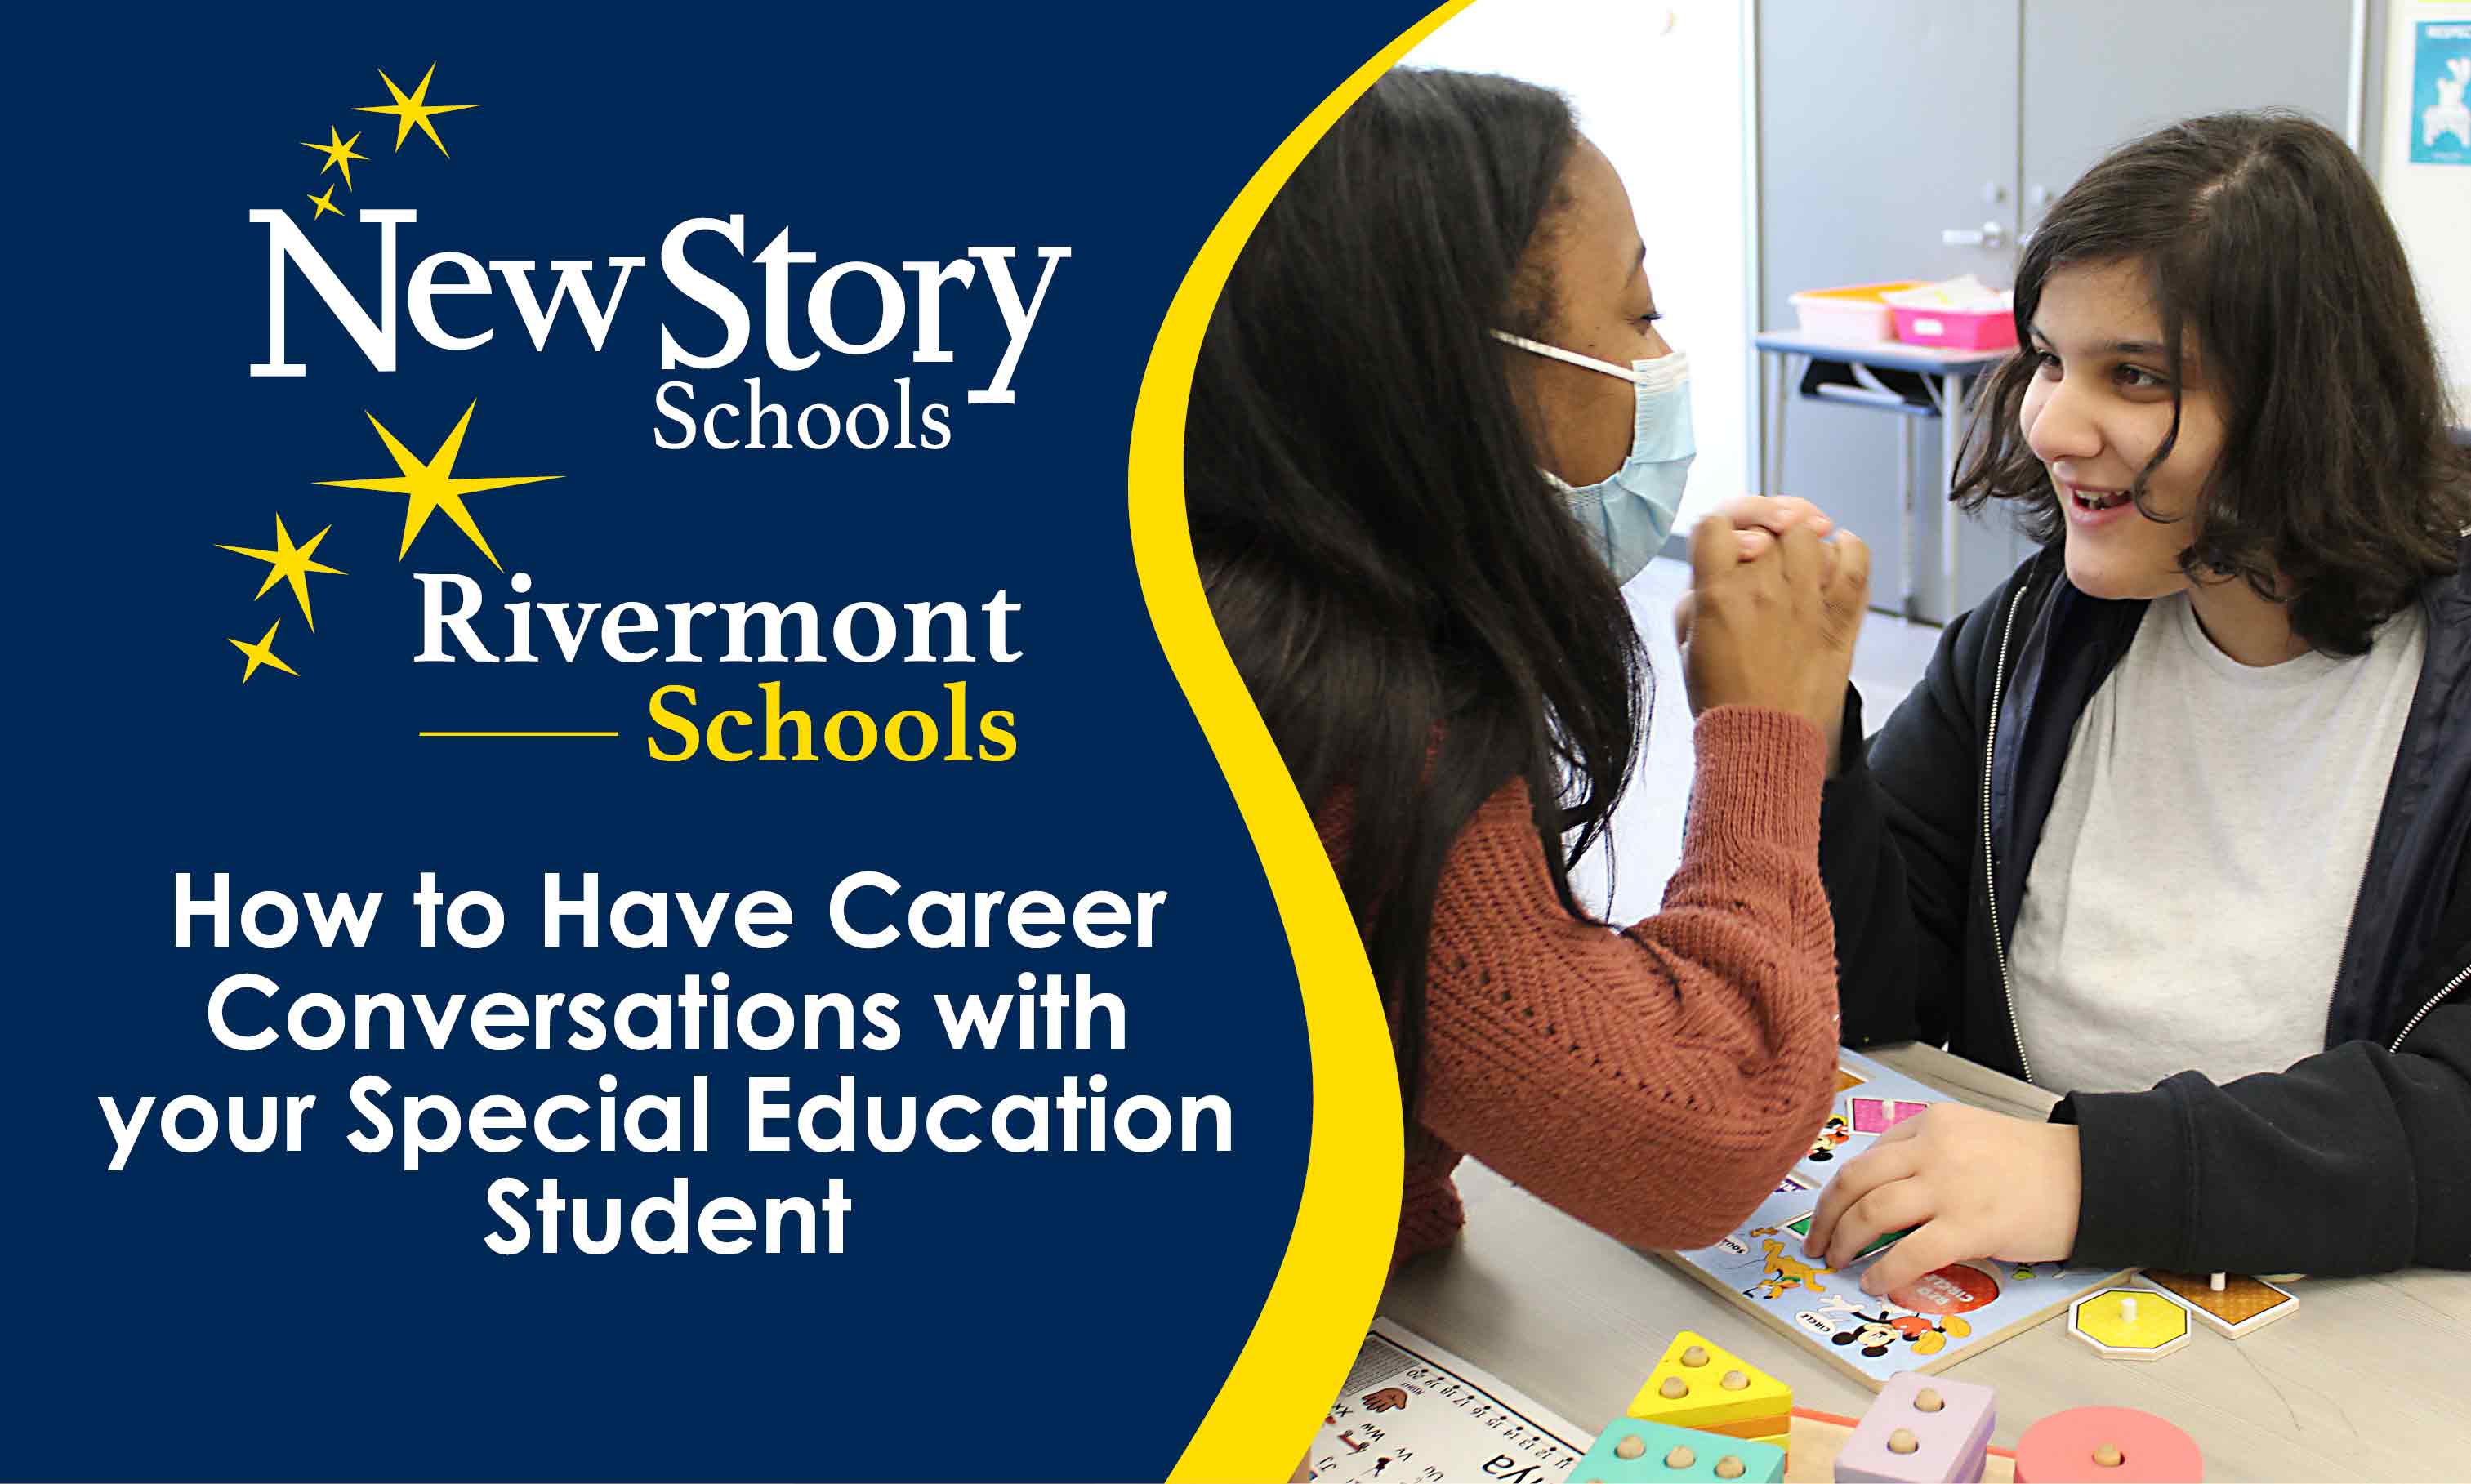 How to Have Career Conversations with your Special Education Student